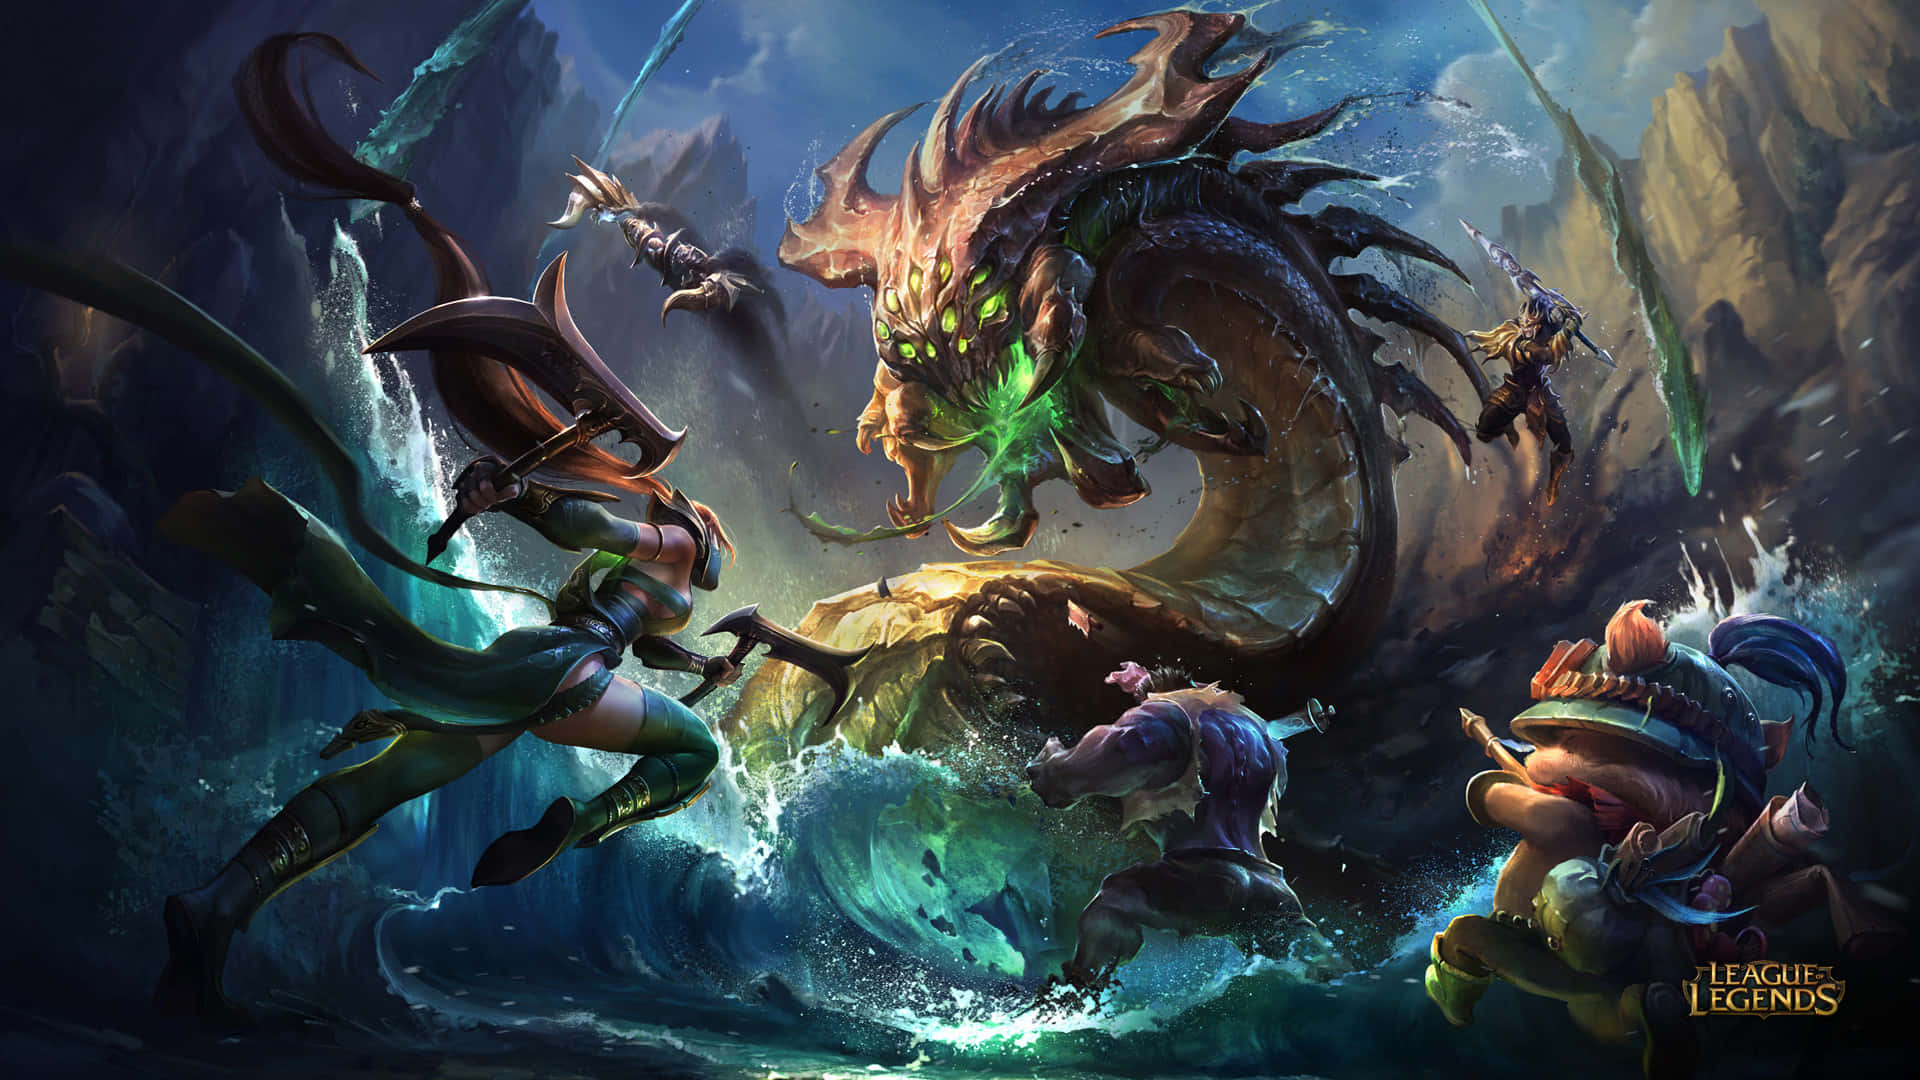 Summon Your True Strength with League of Legends.